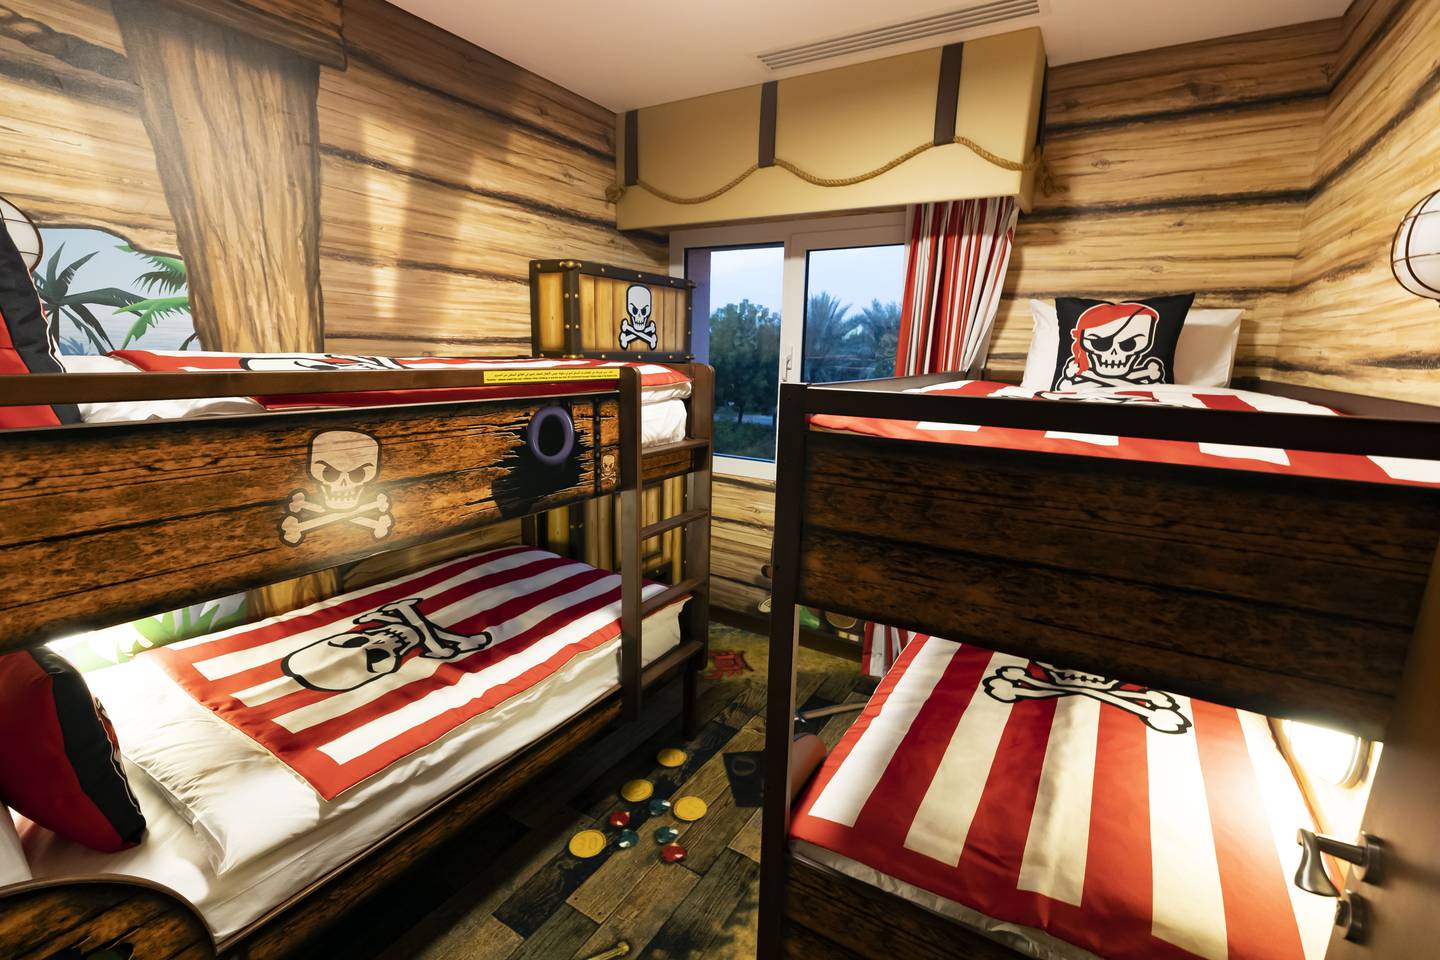 A Pirate suite at Legoland hotel, where children have their own bunk bed-filled room. Chris Whiteoak / The National